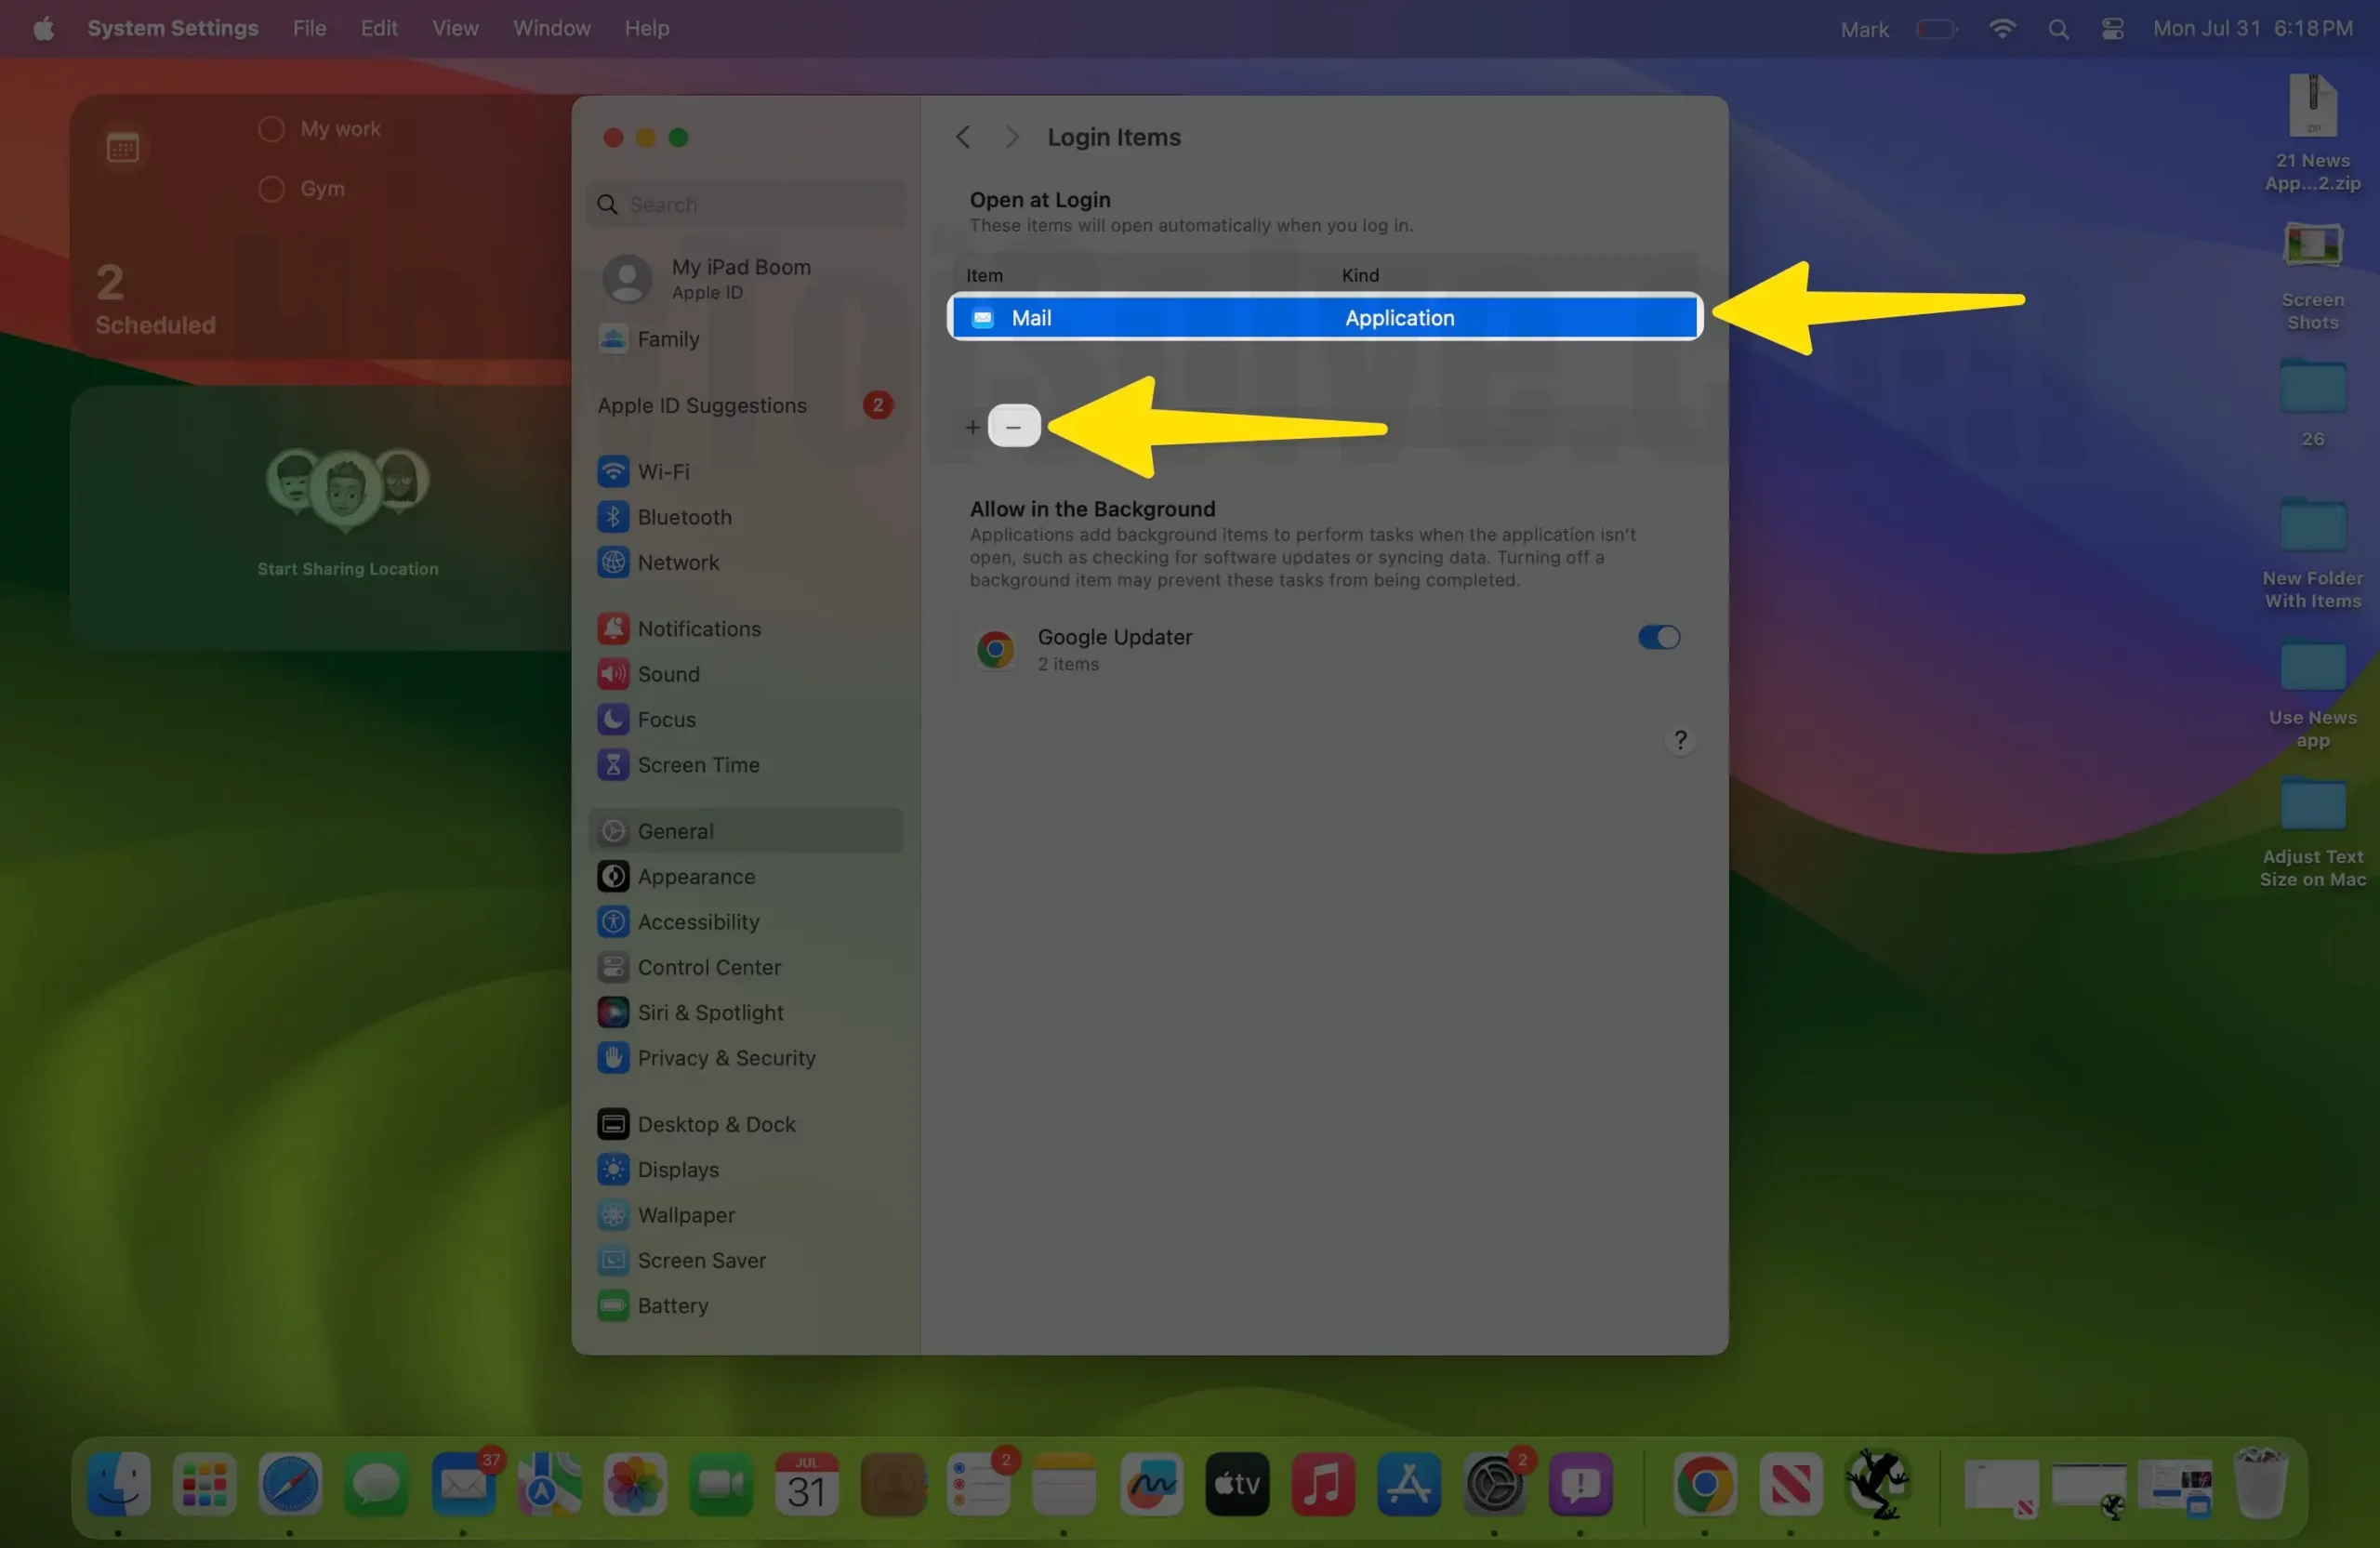 Remove apple mail app from login items